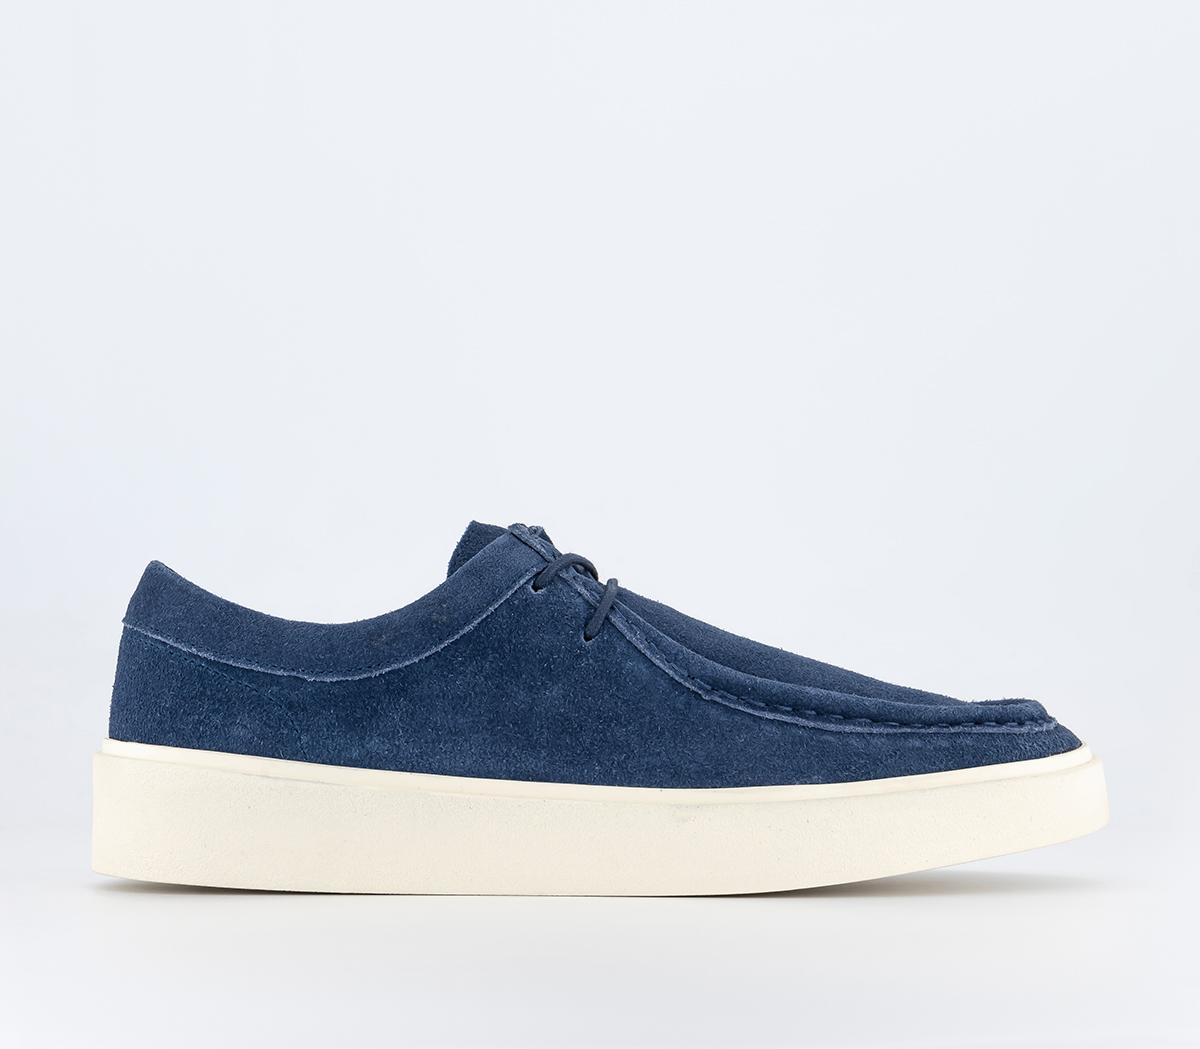 OFFICECooper Suede Apron Stitch Derby Shoes Navy Suede